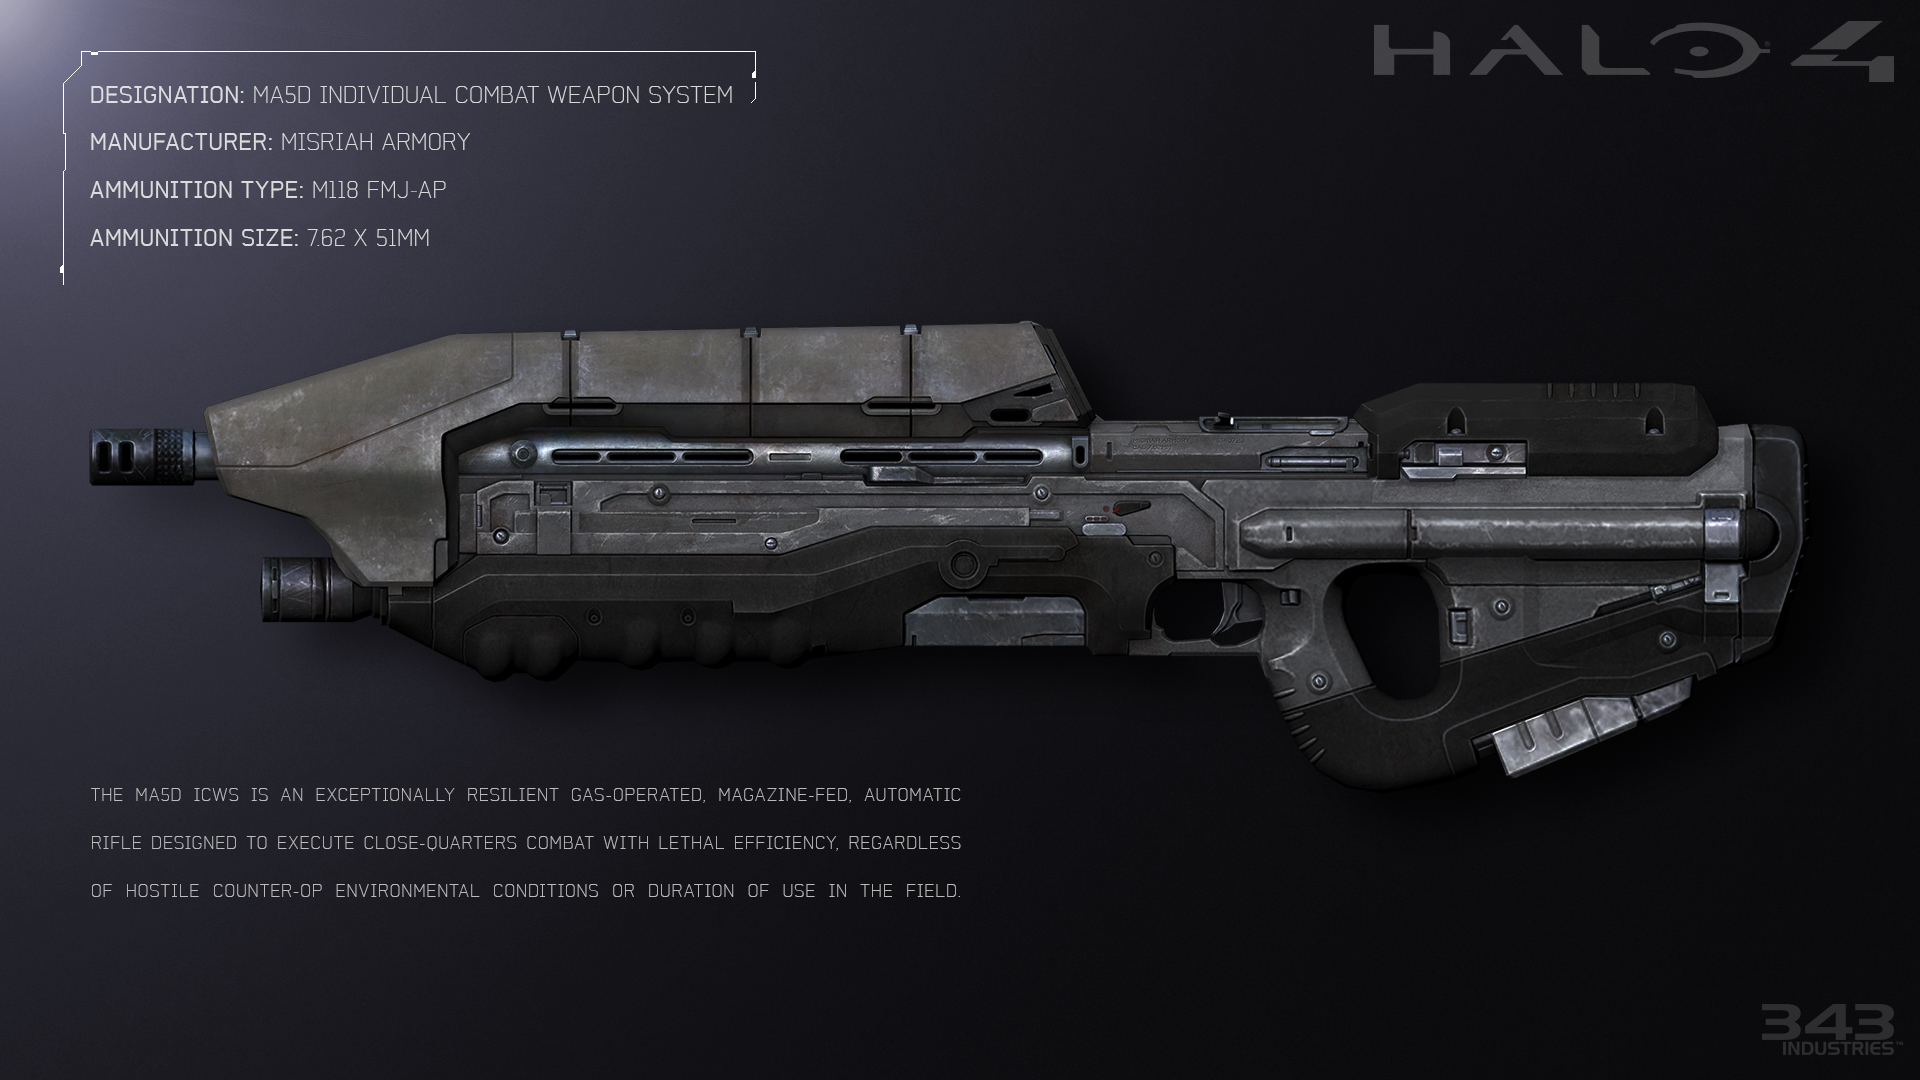 Video Game Halo 4 1920x1080